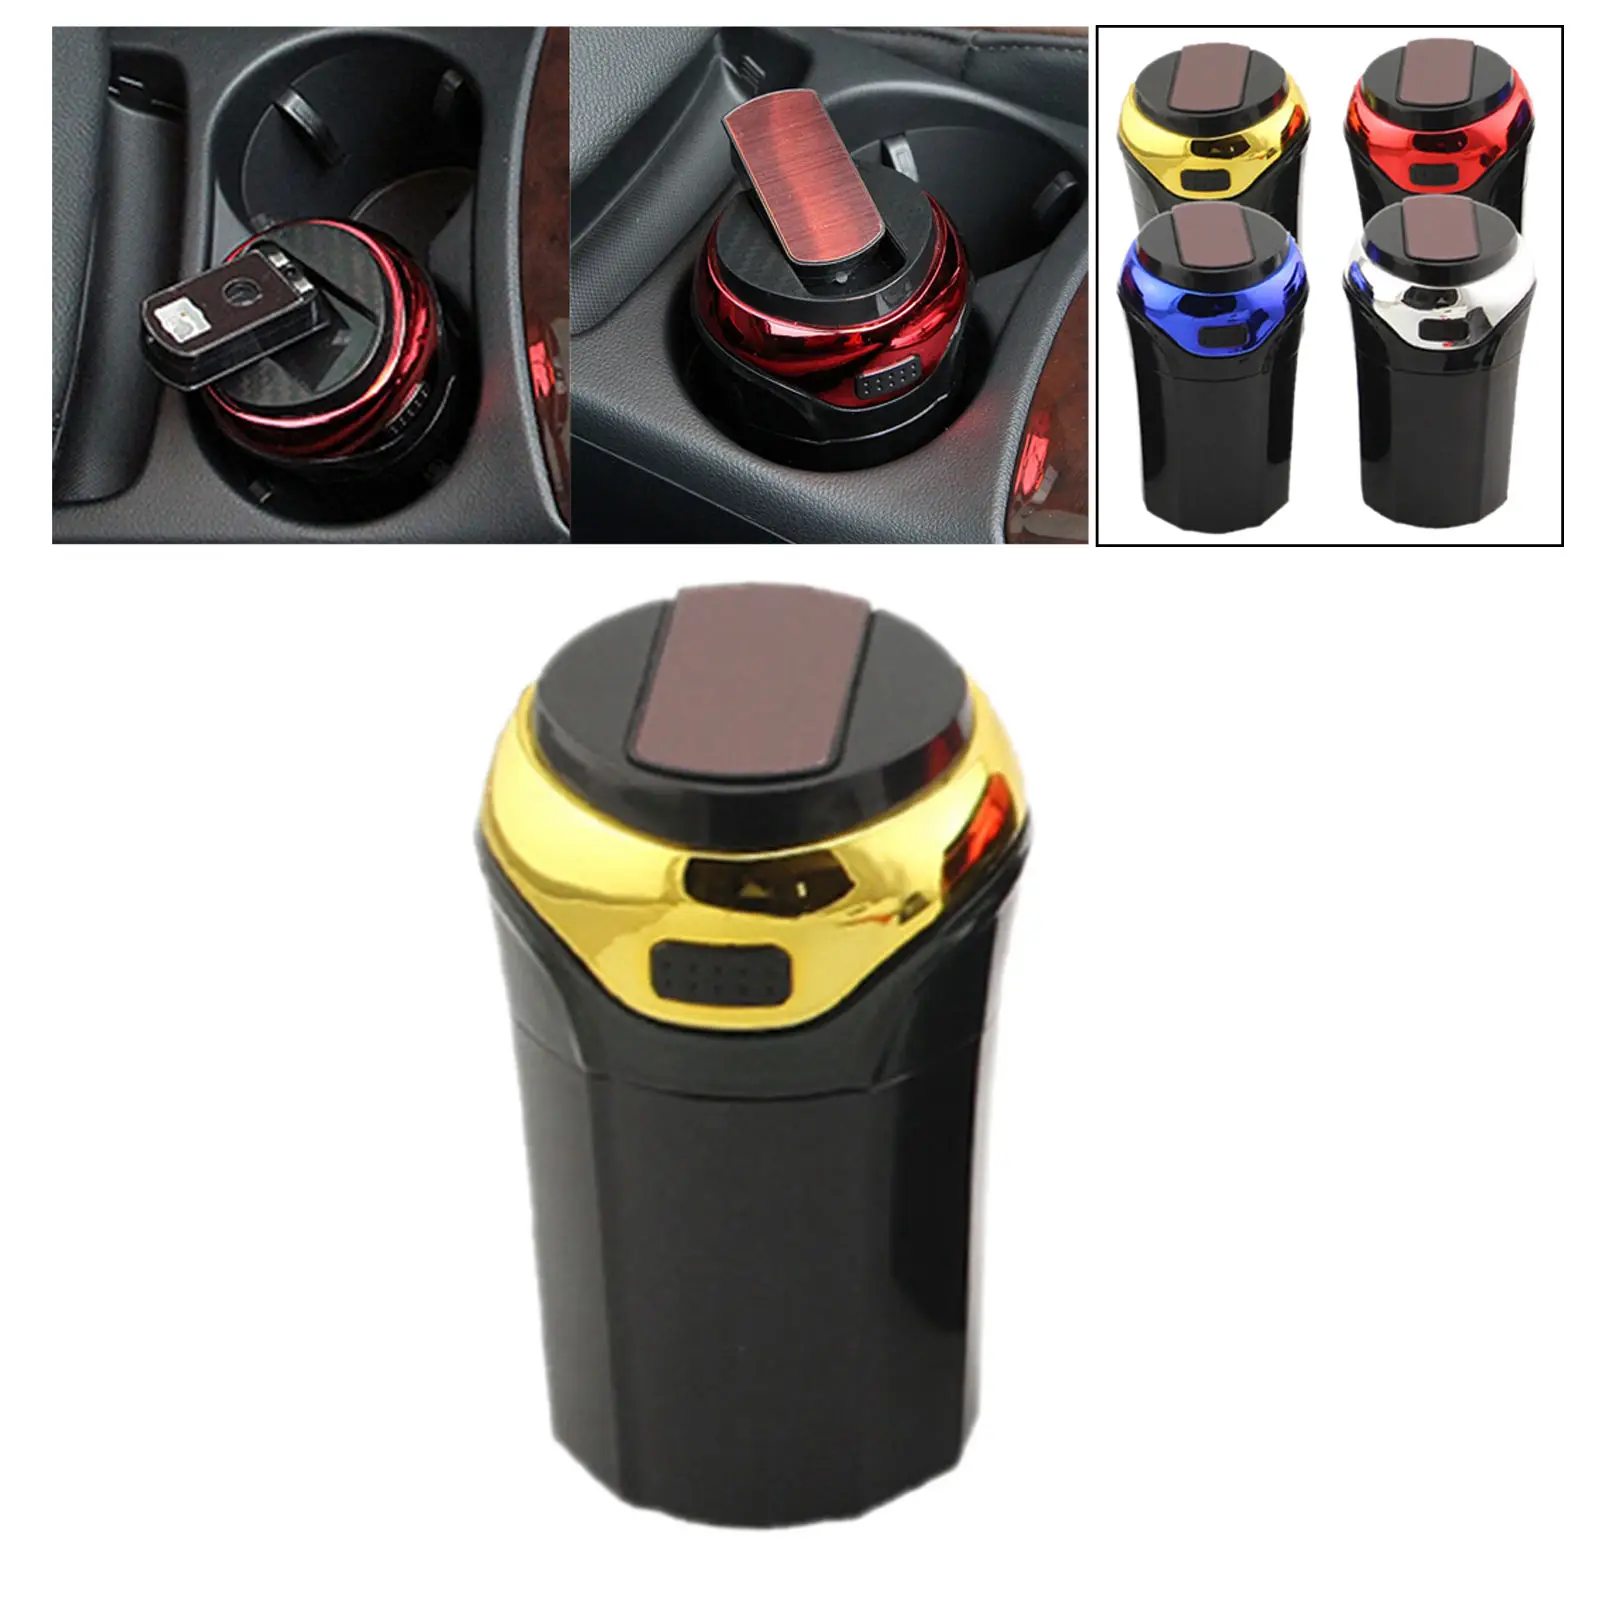 1PCS Portable Car Ashtray Storage Cup Container Cigar Ash Cup Holder with Lid Black Car Styling Universal